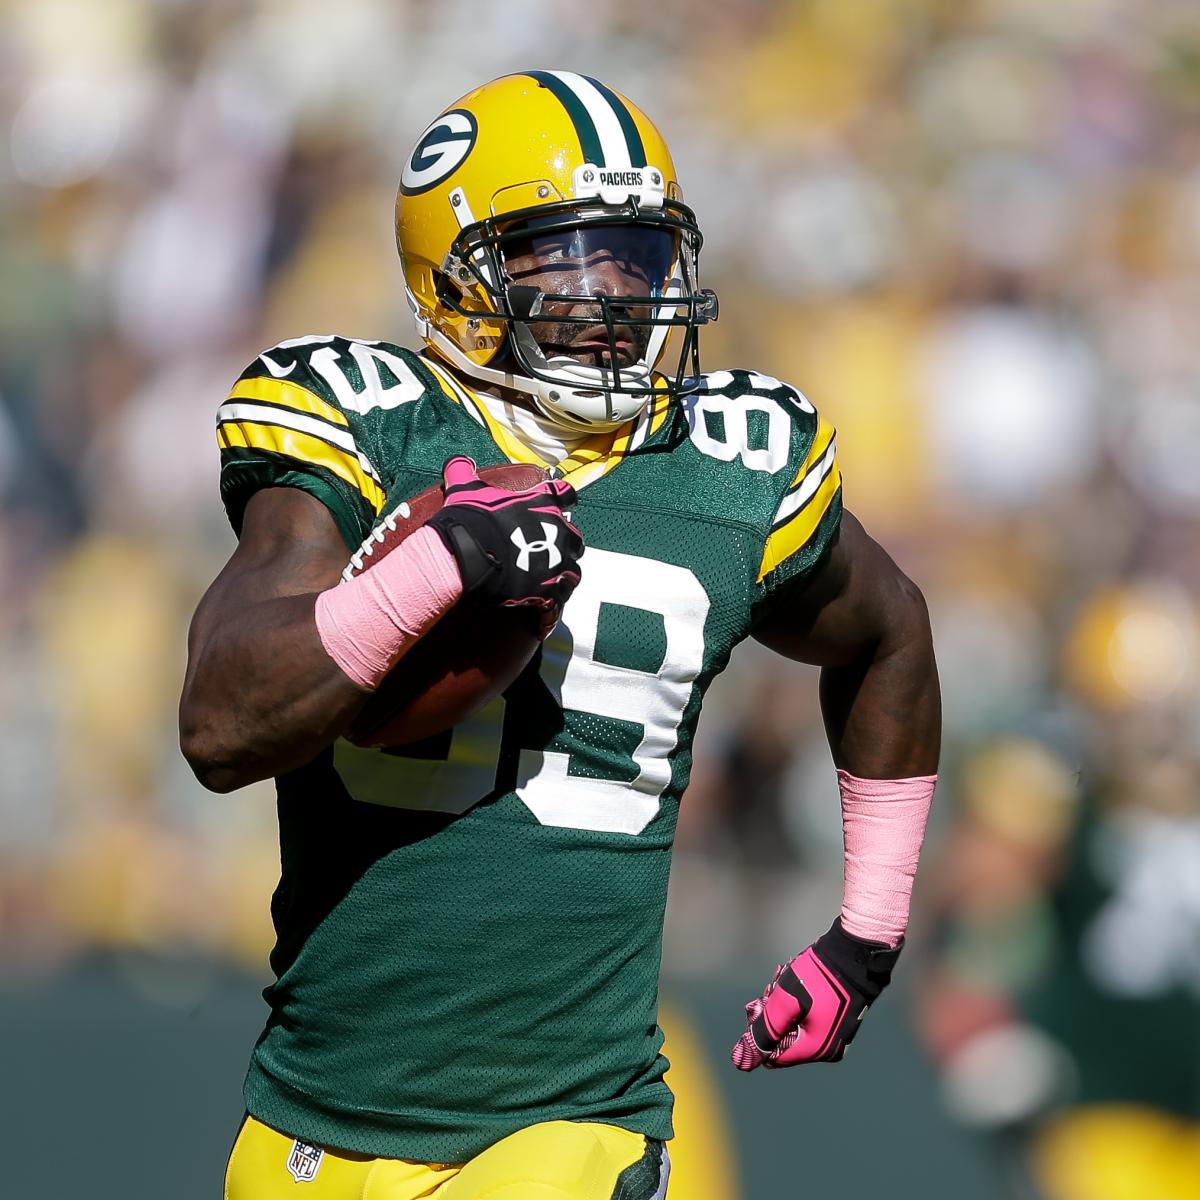 James Jones Announces Retirement at Age 33; Will Join NFL Network